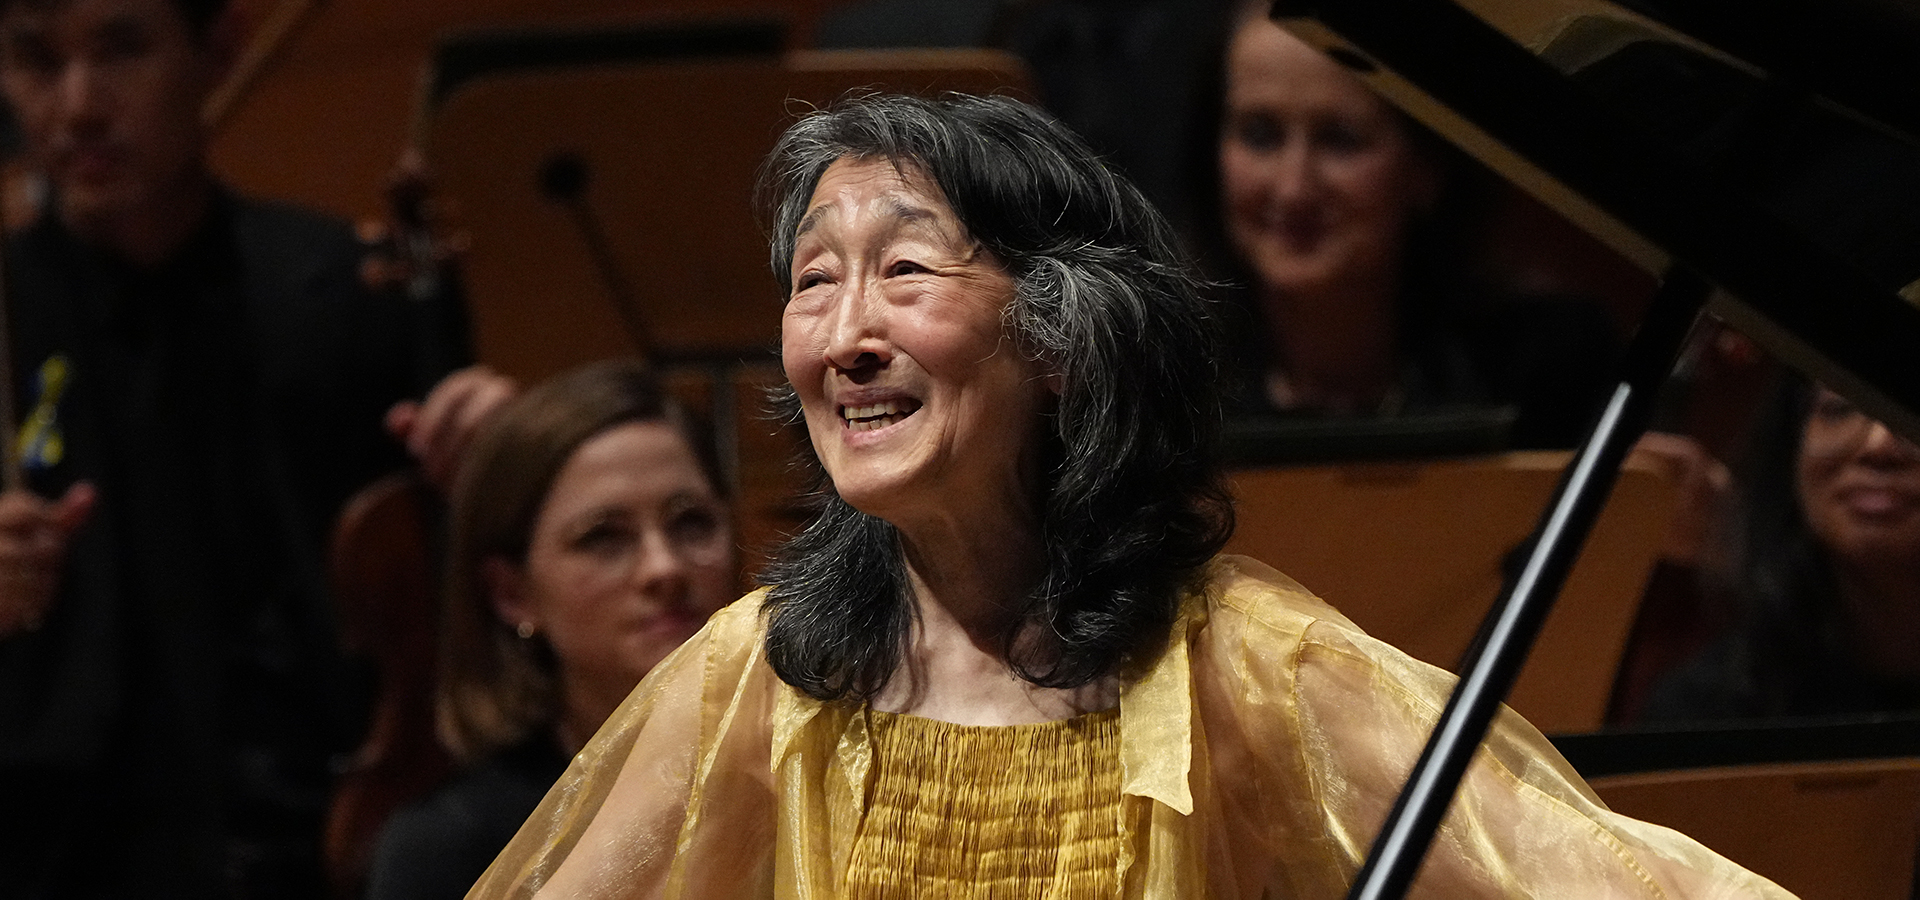 Pianist Mitsuko Uchida stands smiling in sparkling yellow attire, in front of her piano with the Mahler Chamber Orchestra behind her.